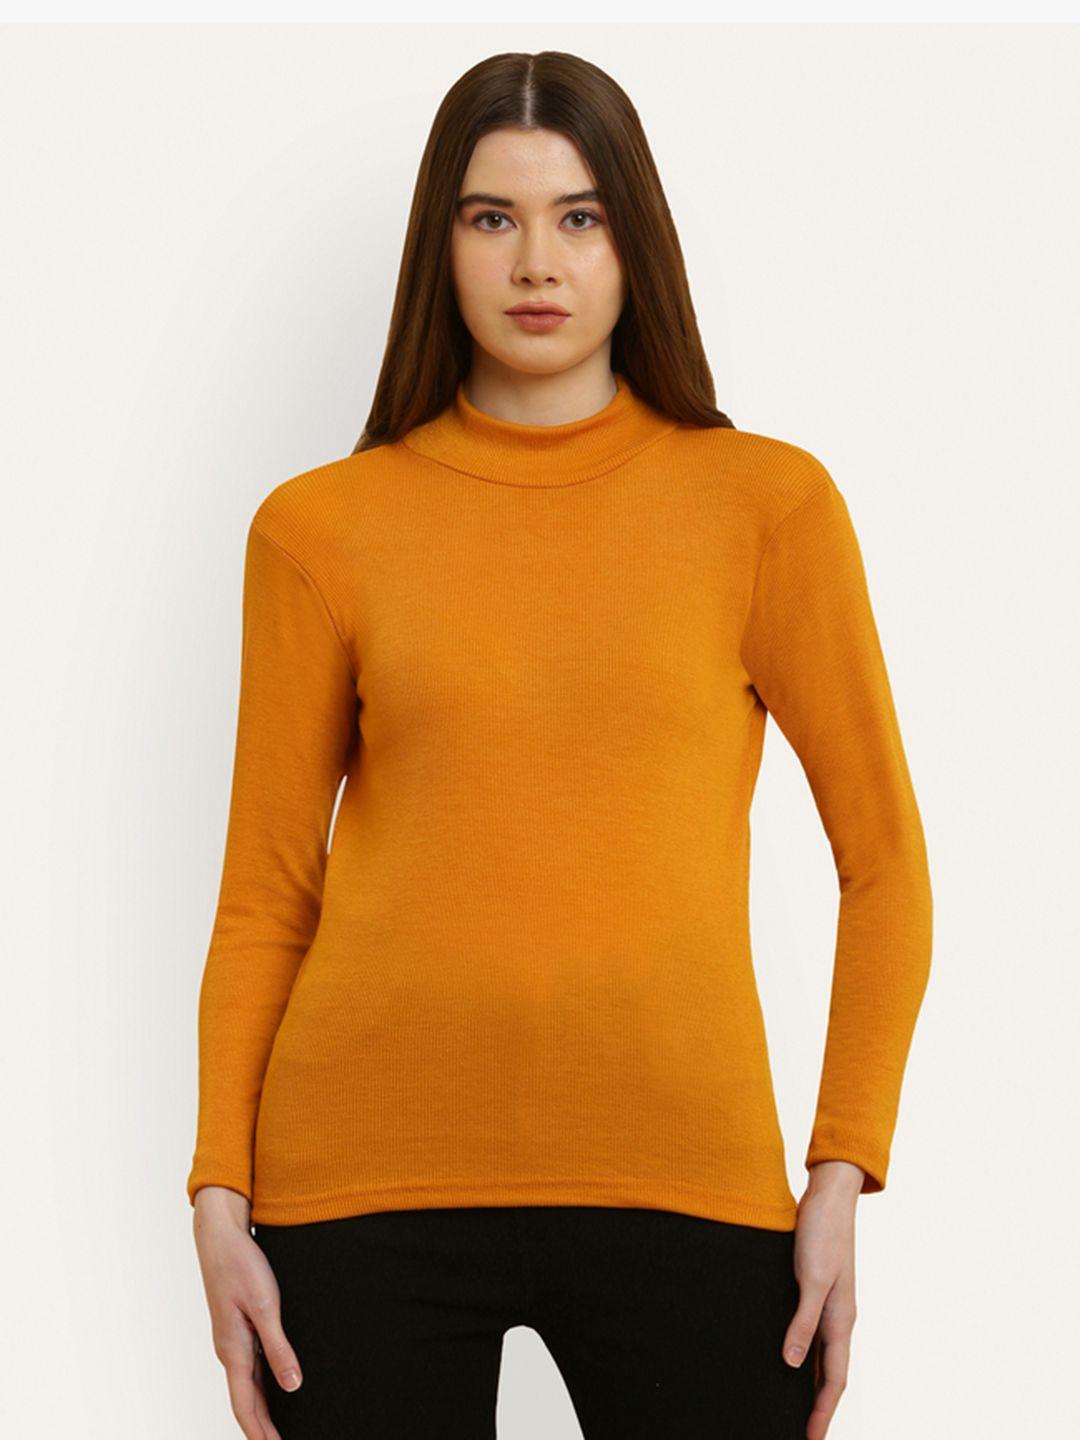 miaz lifestyle high neck long sleeves cotton top